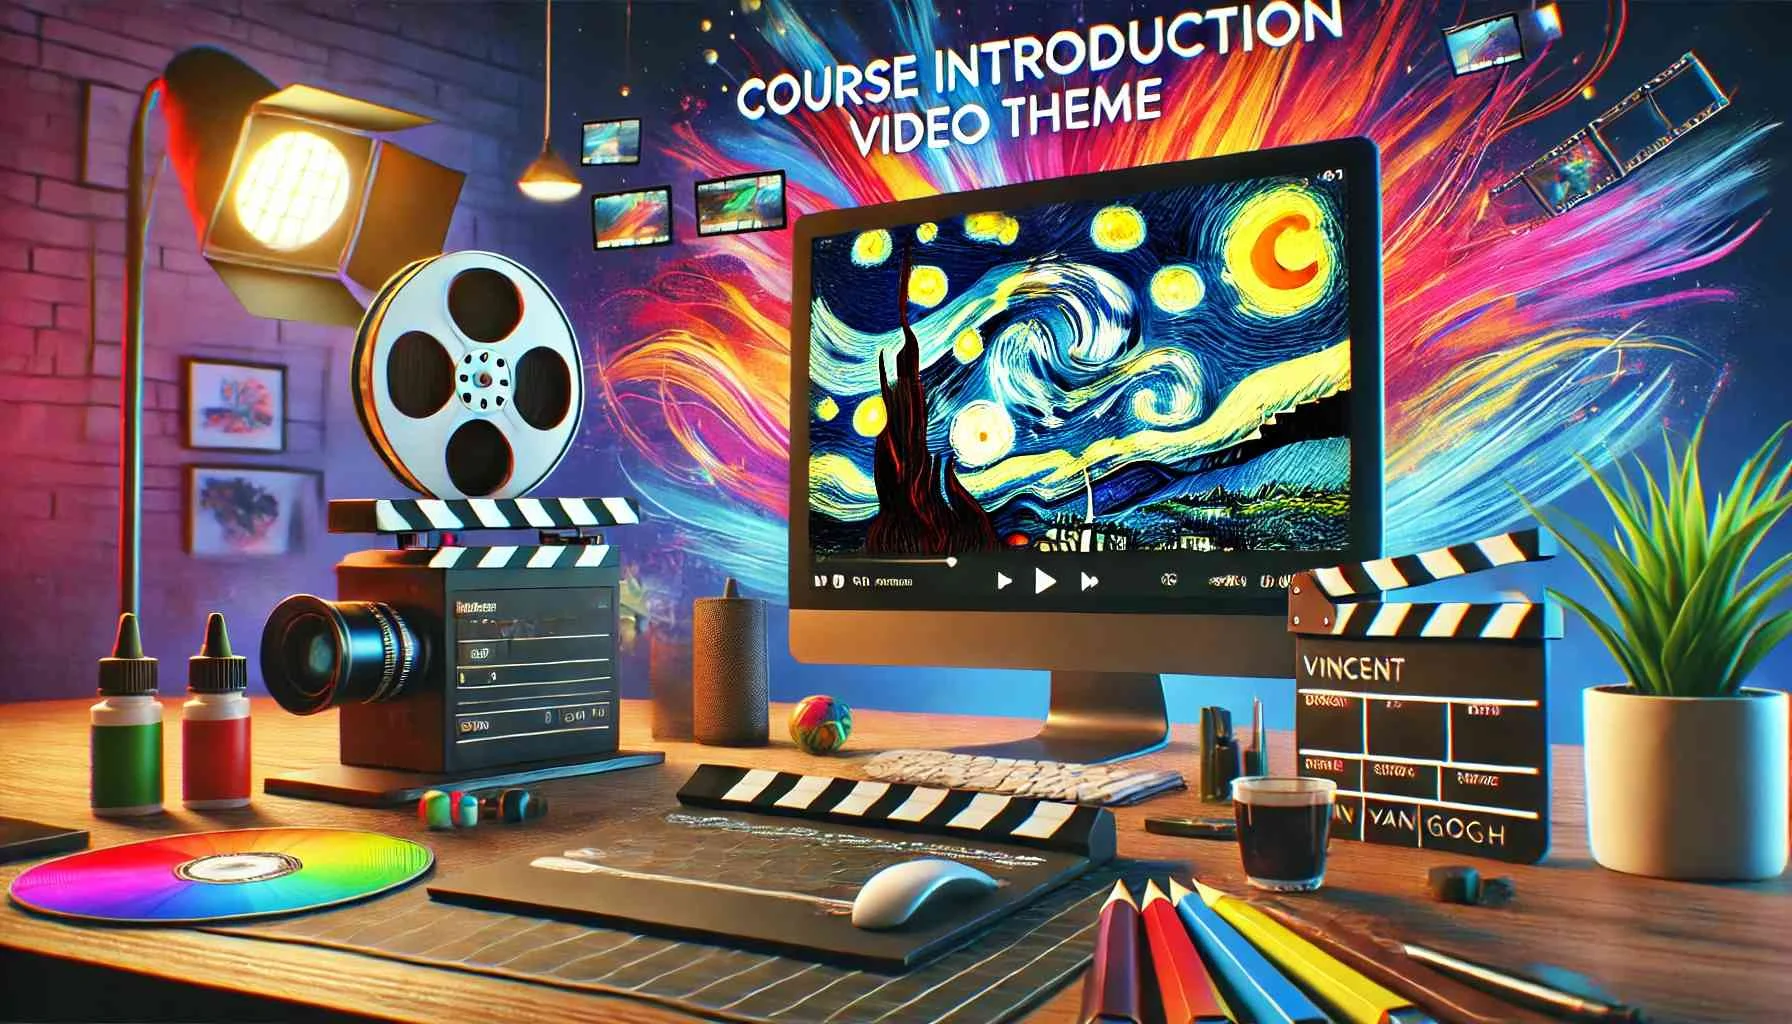 Introduction Video Theme Featuring Elements Like A Film Reel A Clapperboard And A Computer Screen Displaying Video Editing Sof 20240704 1502